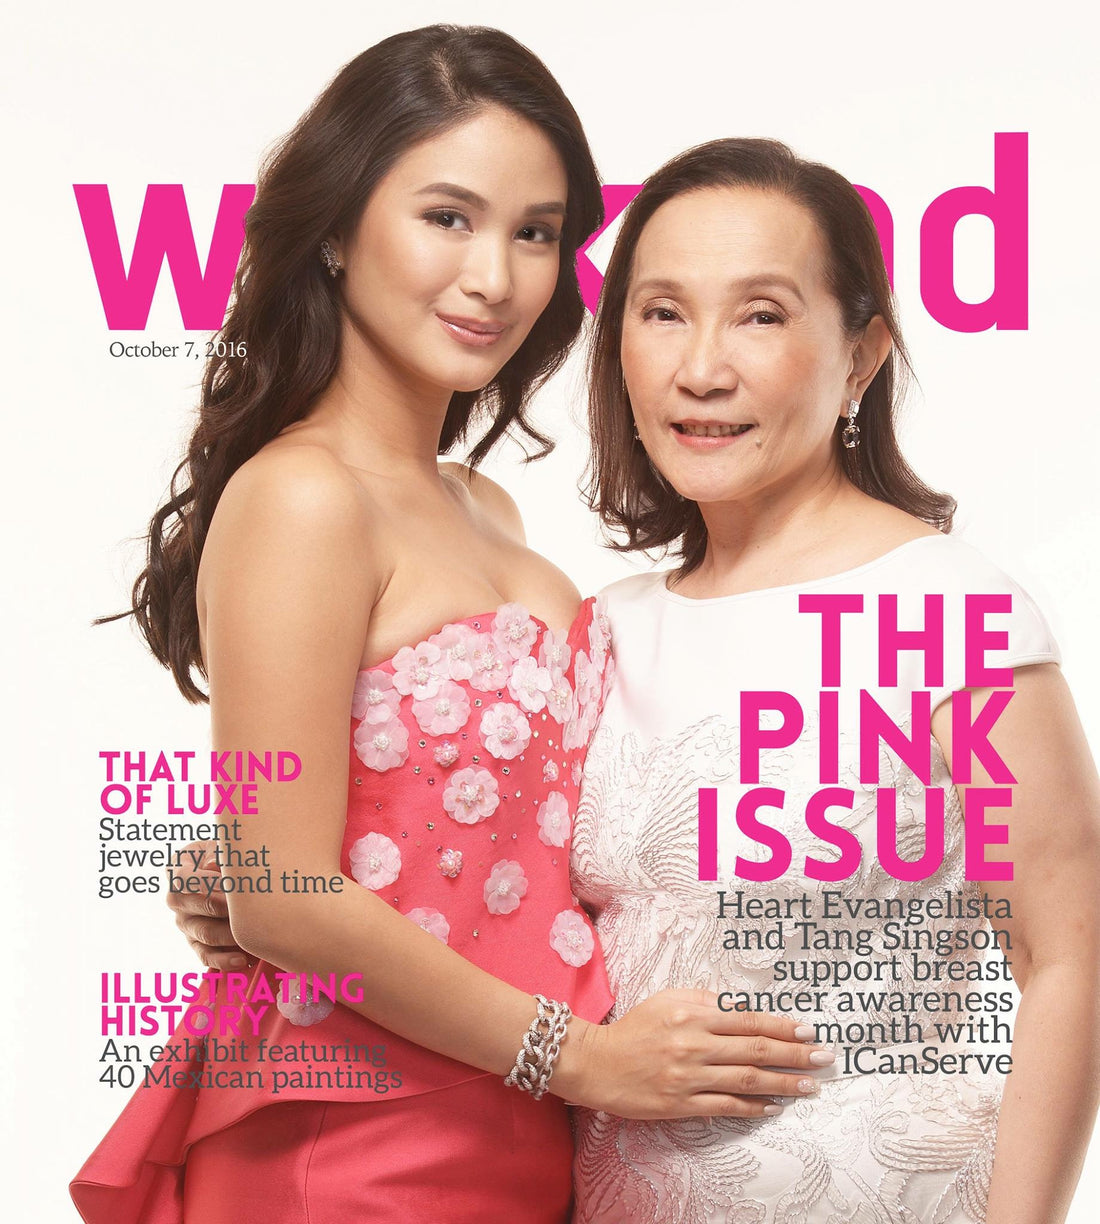 Style Weekend Cover featuring Heart Evangelista and Tang Singson, Oct 2016 Issue